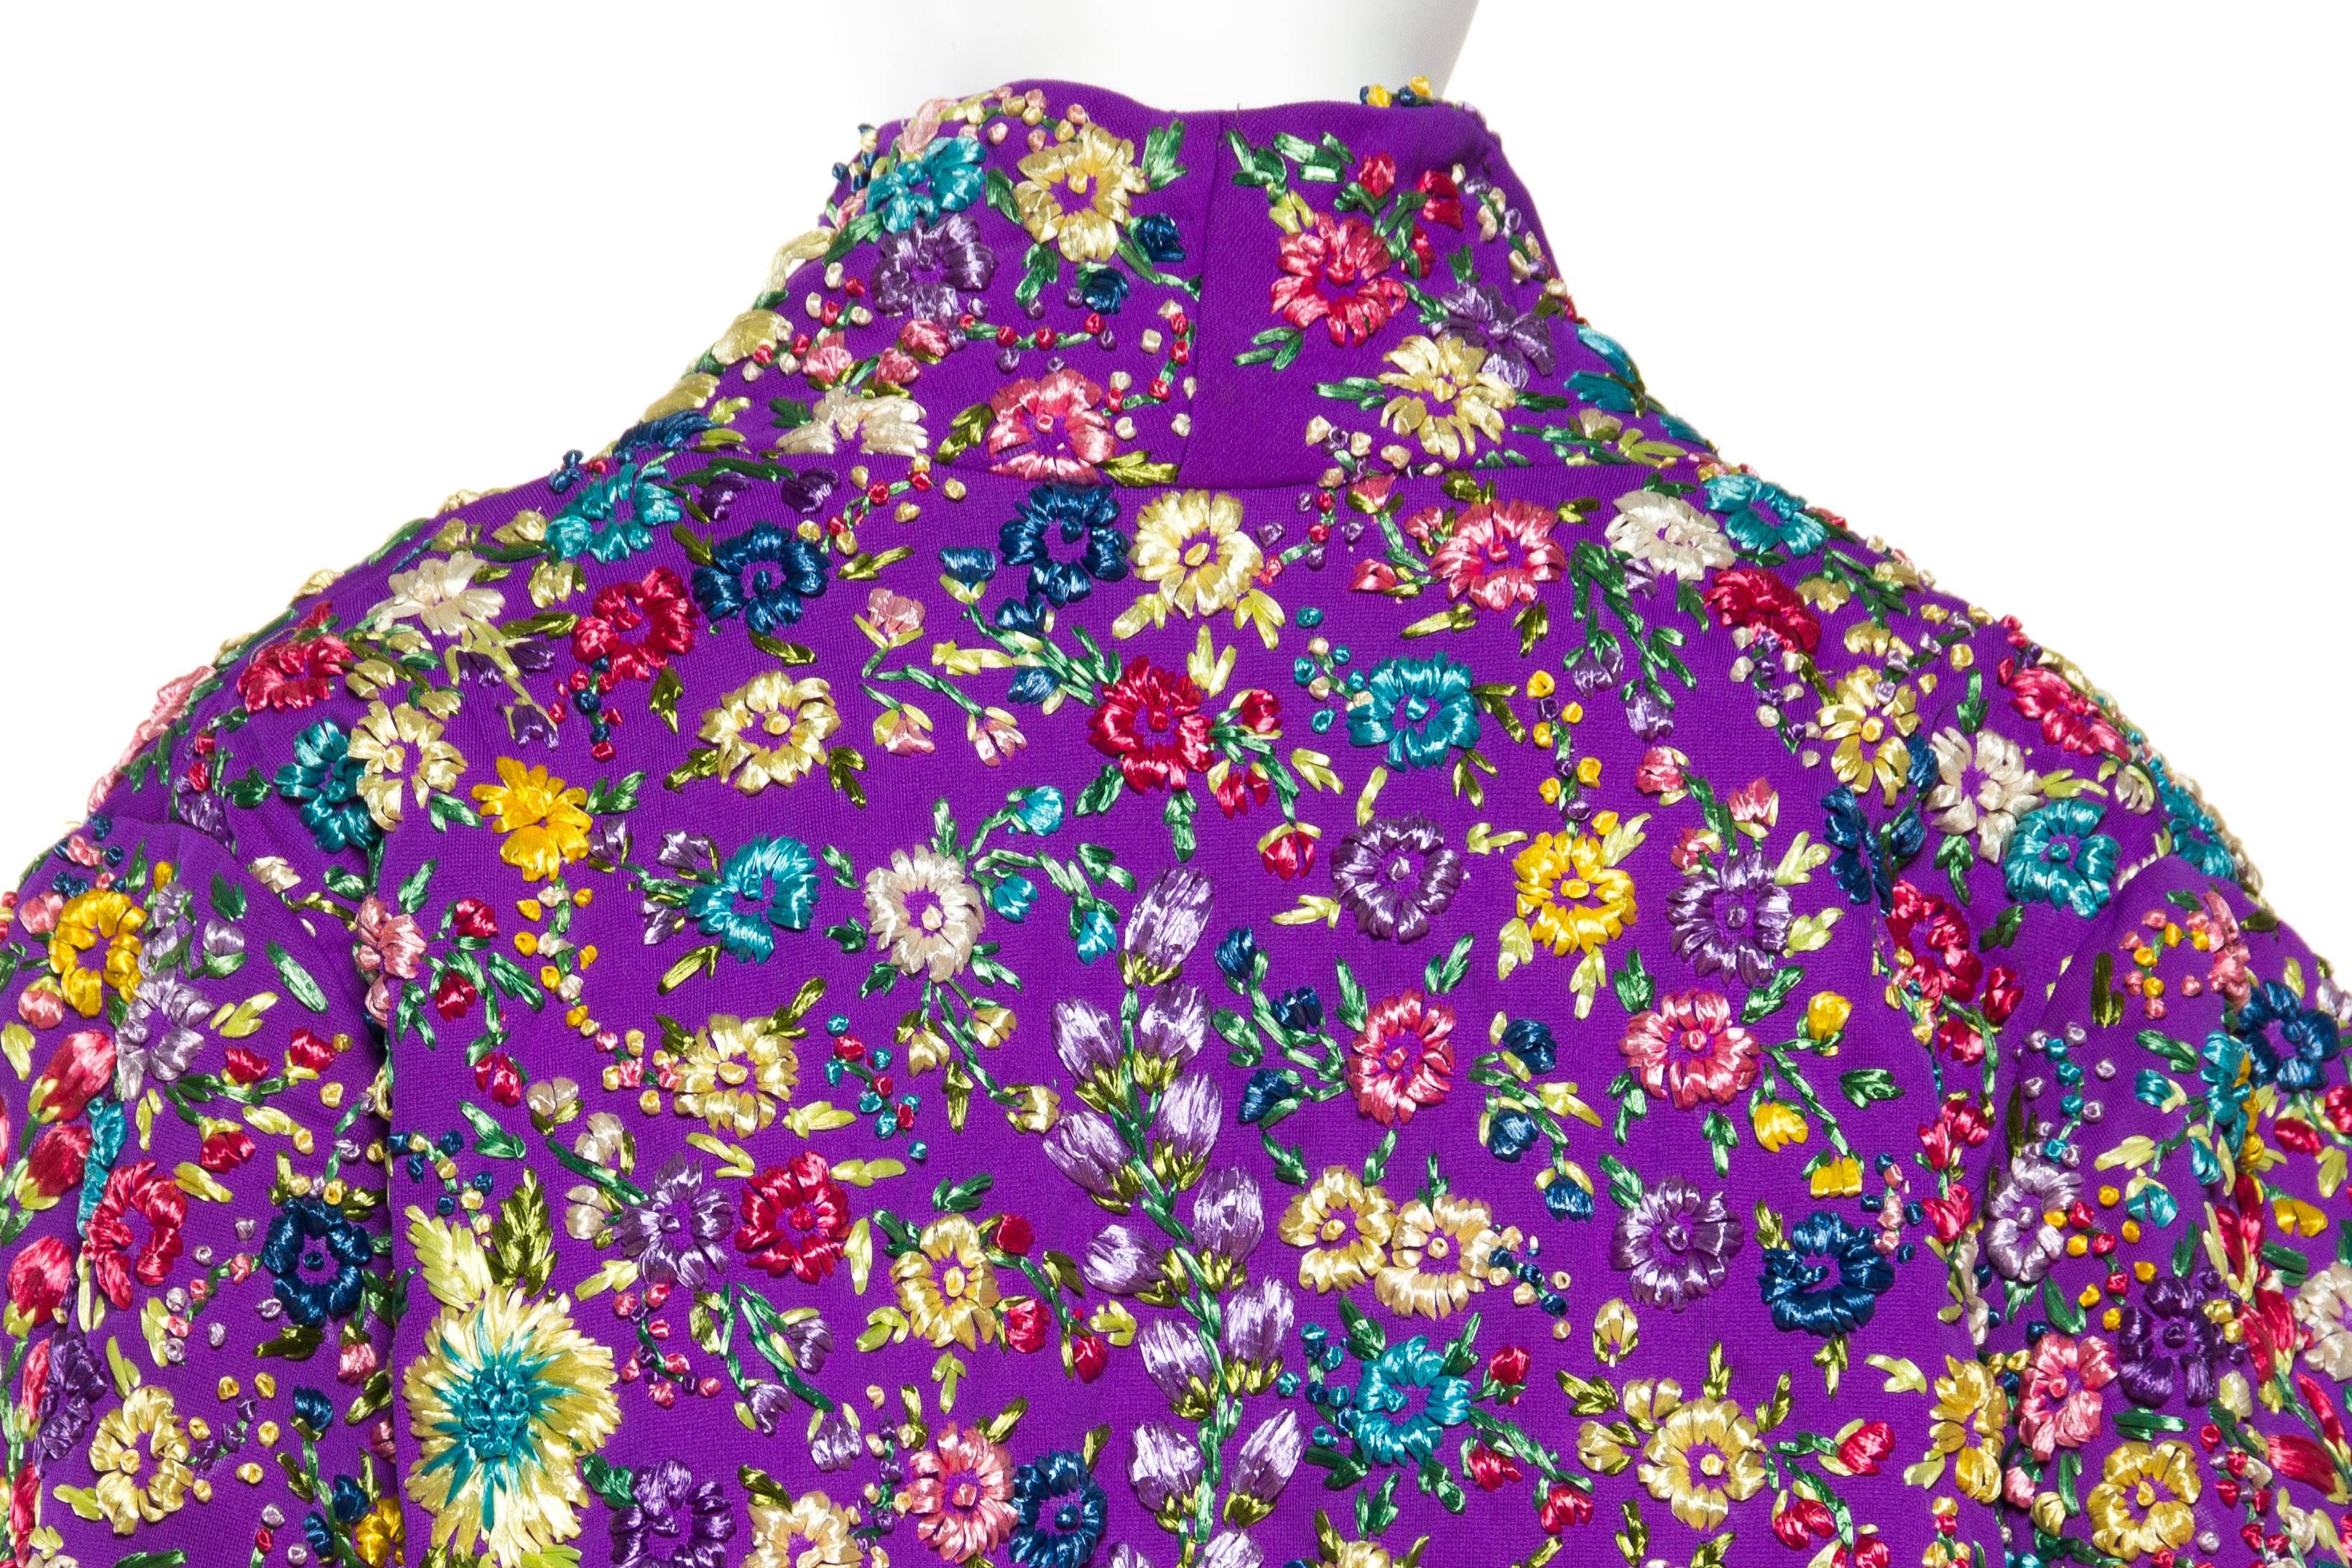 Phenomenal Fully Embroidered Gucci Like Floral Coat 3